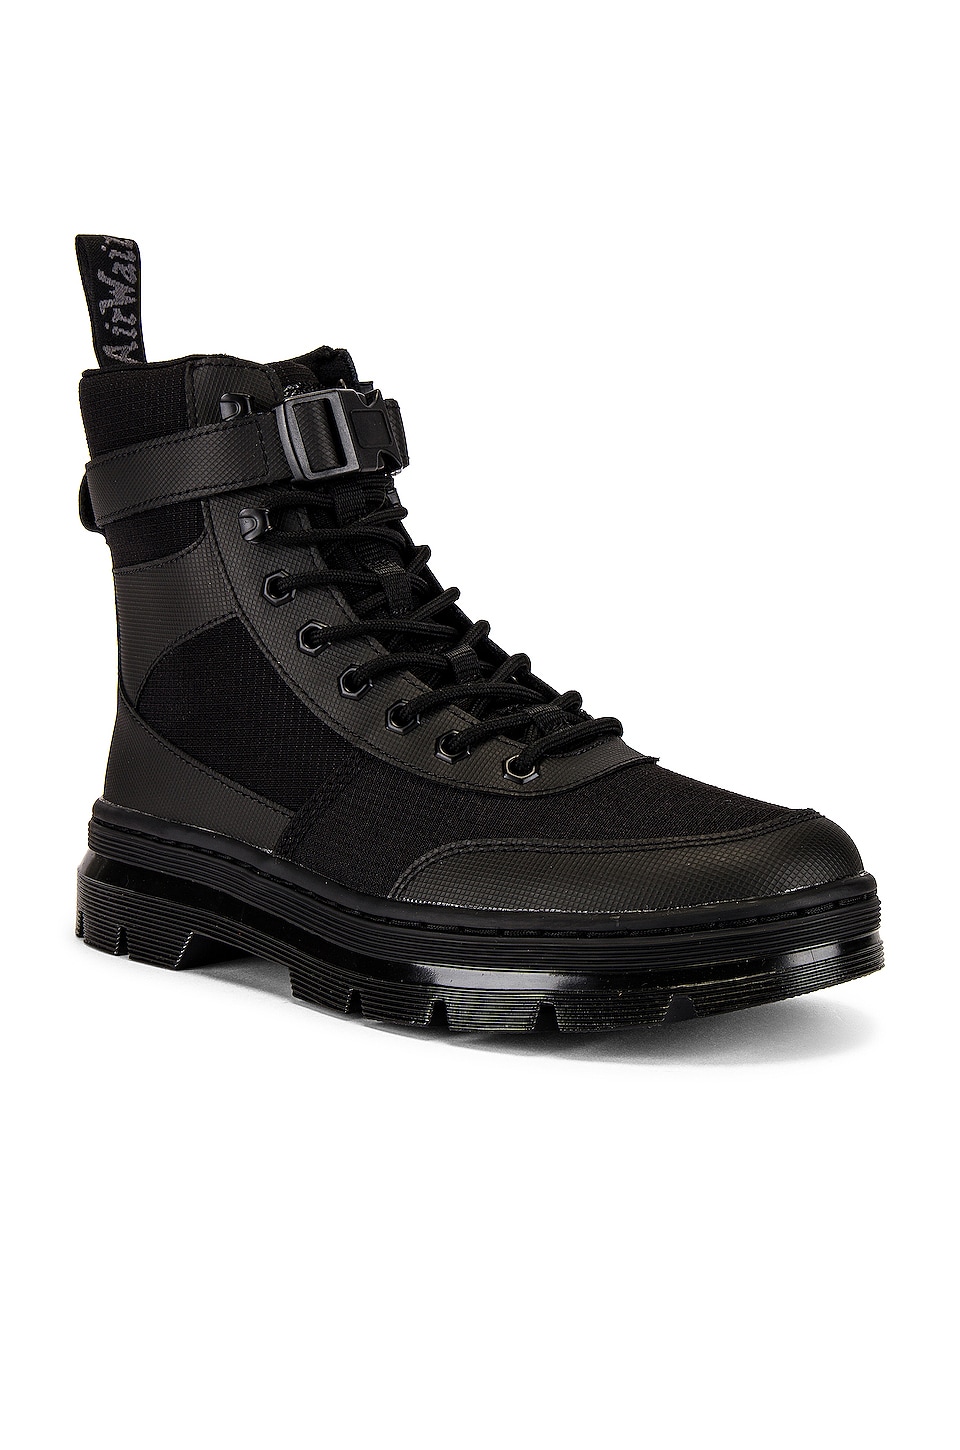 Dr. Martens Combs Tech Boot in Black | REVOLVE